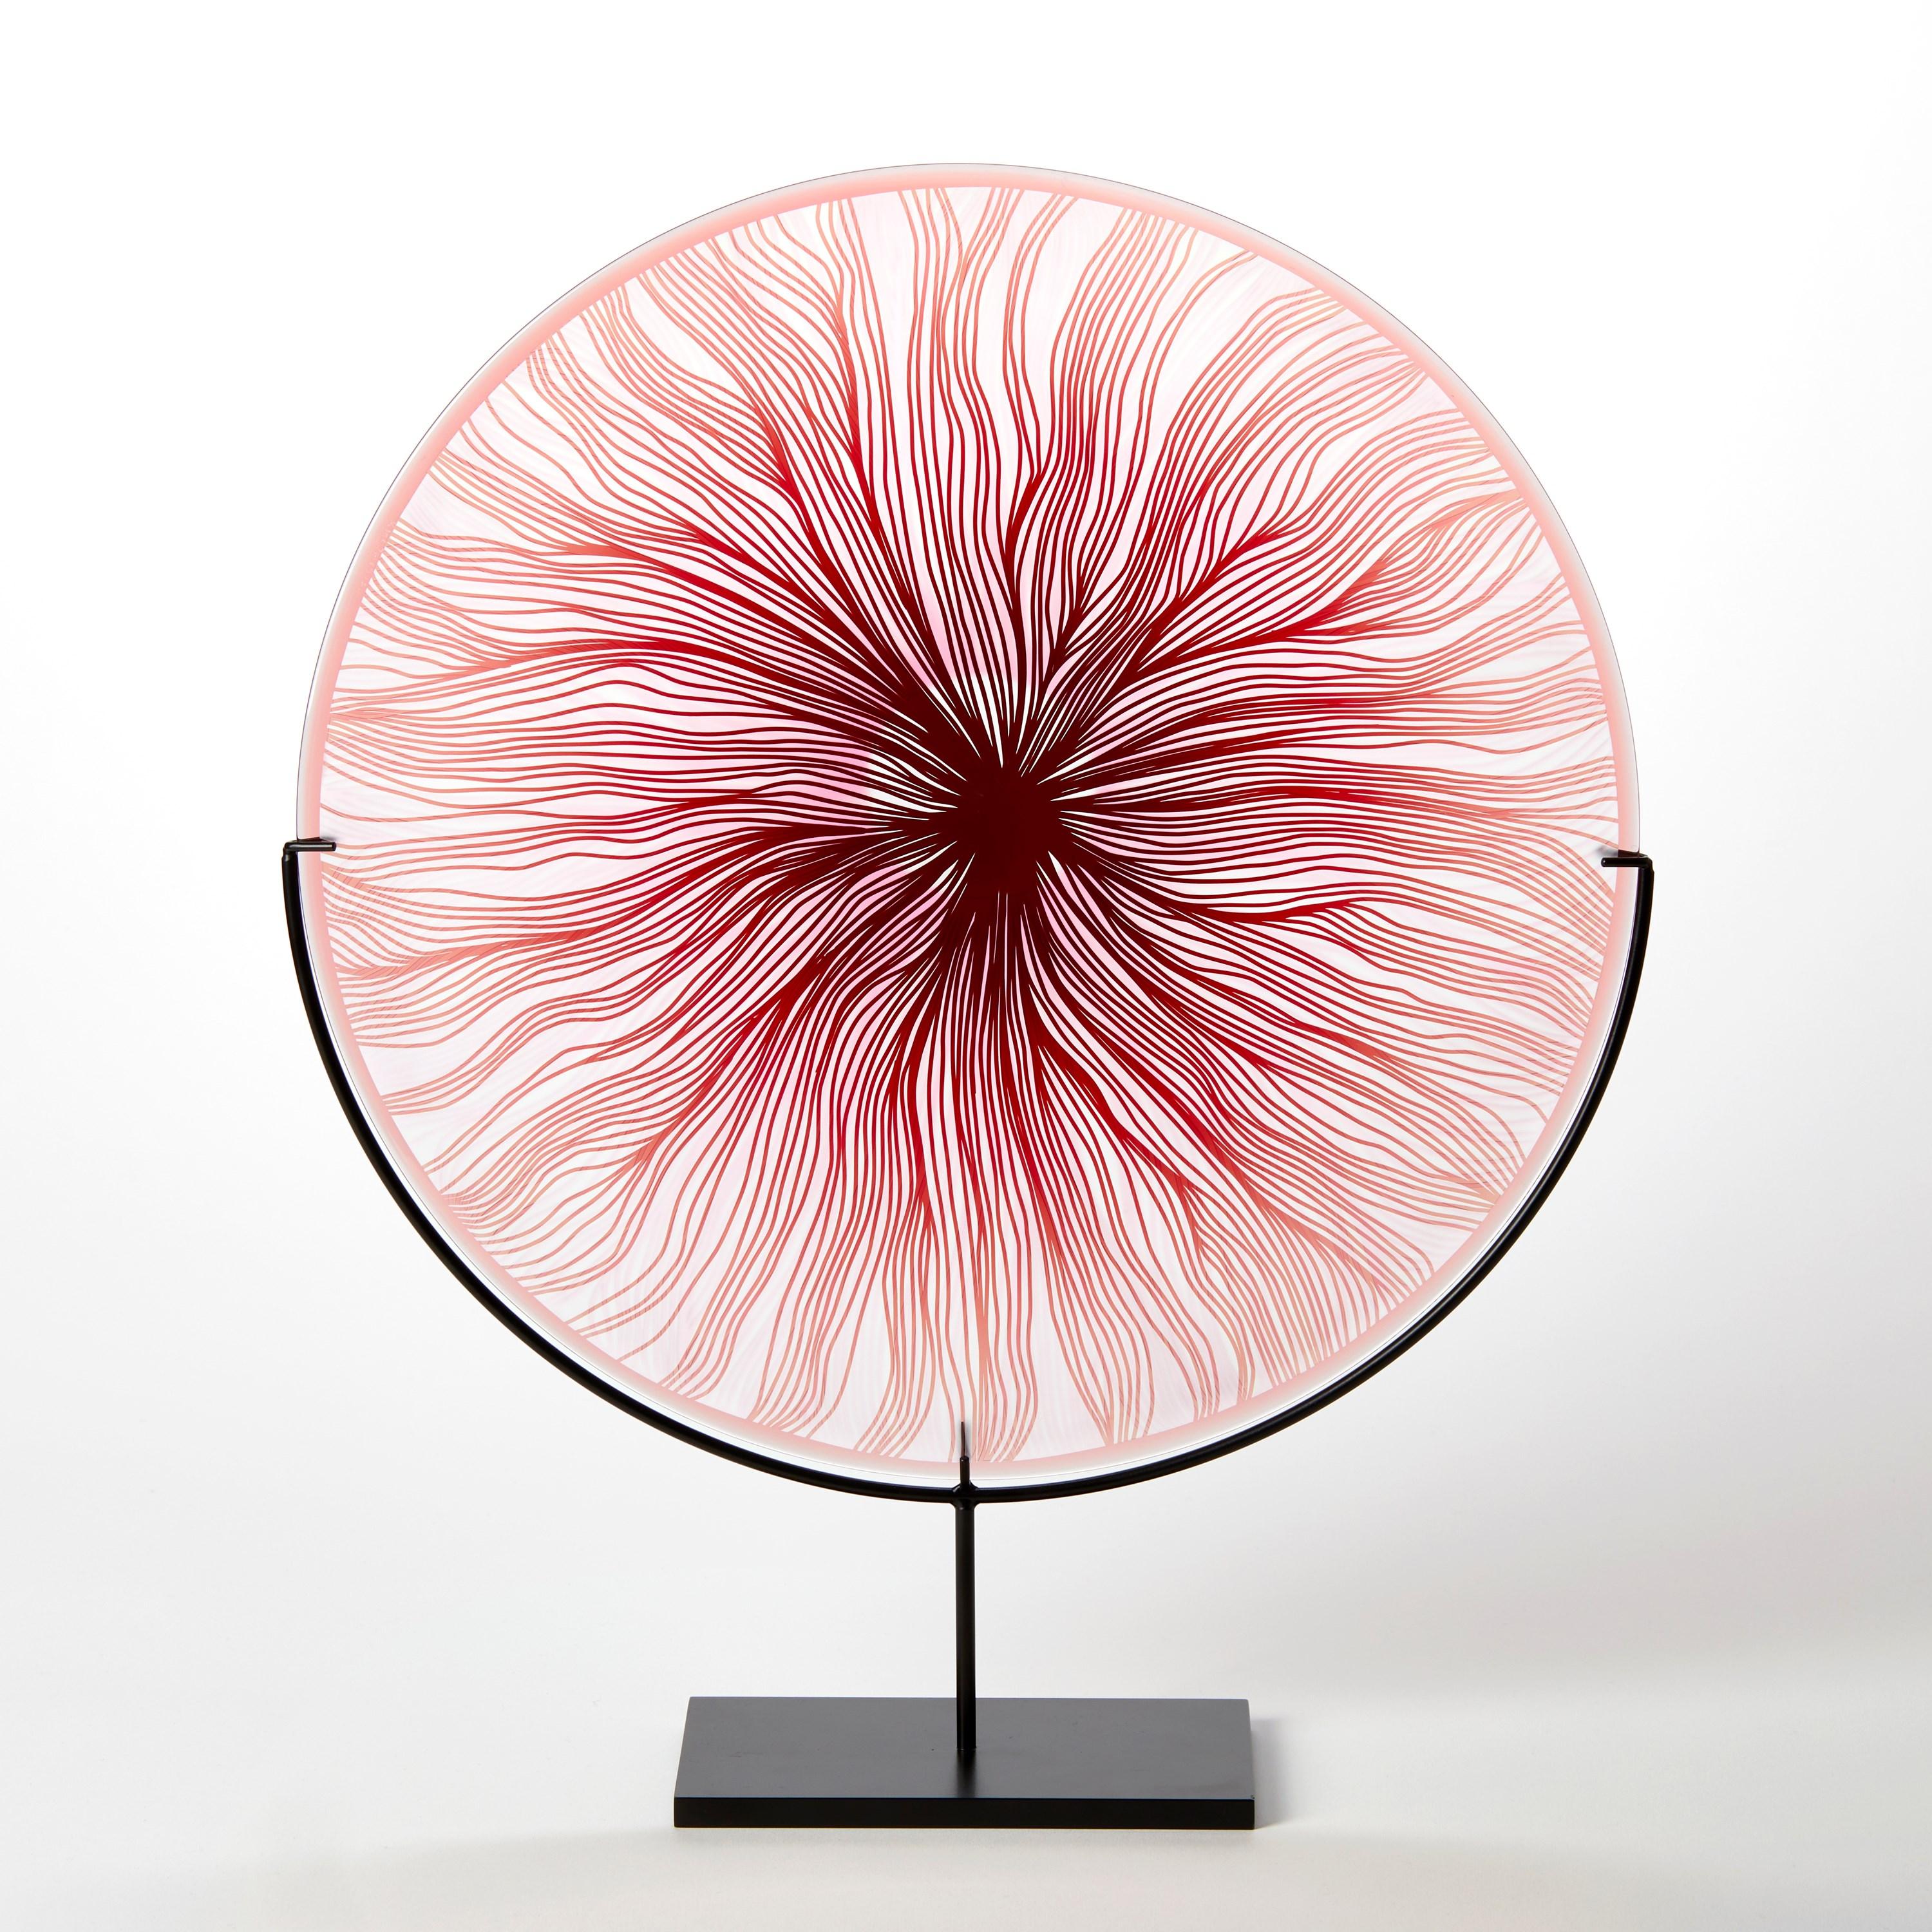 'Solar Storm Ruby Red over Pale Pink' is a unique handblown and cut glass artwork by the British artist, Kate Jones of Gillies Jones.

Created with Stephen Gillies, with whom Jones makes many works in collaboration, these exquisite sculptural plates